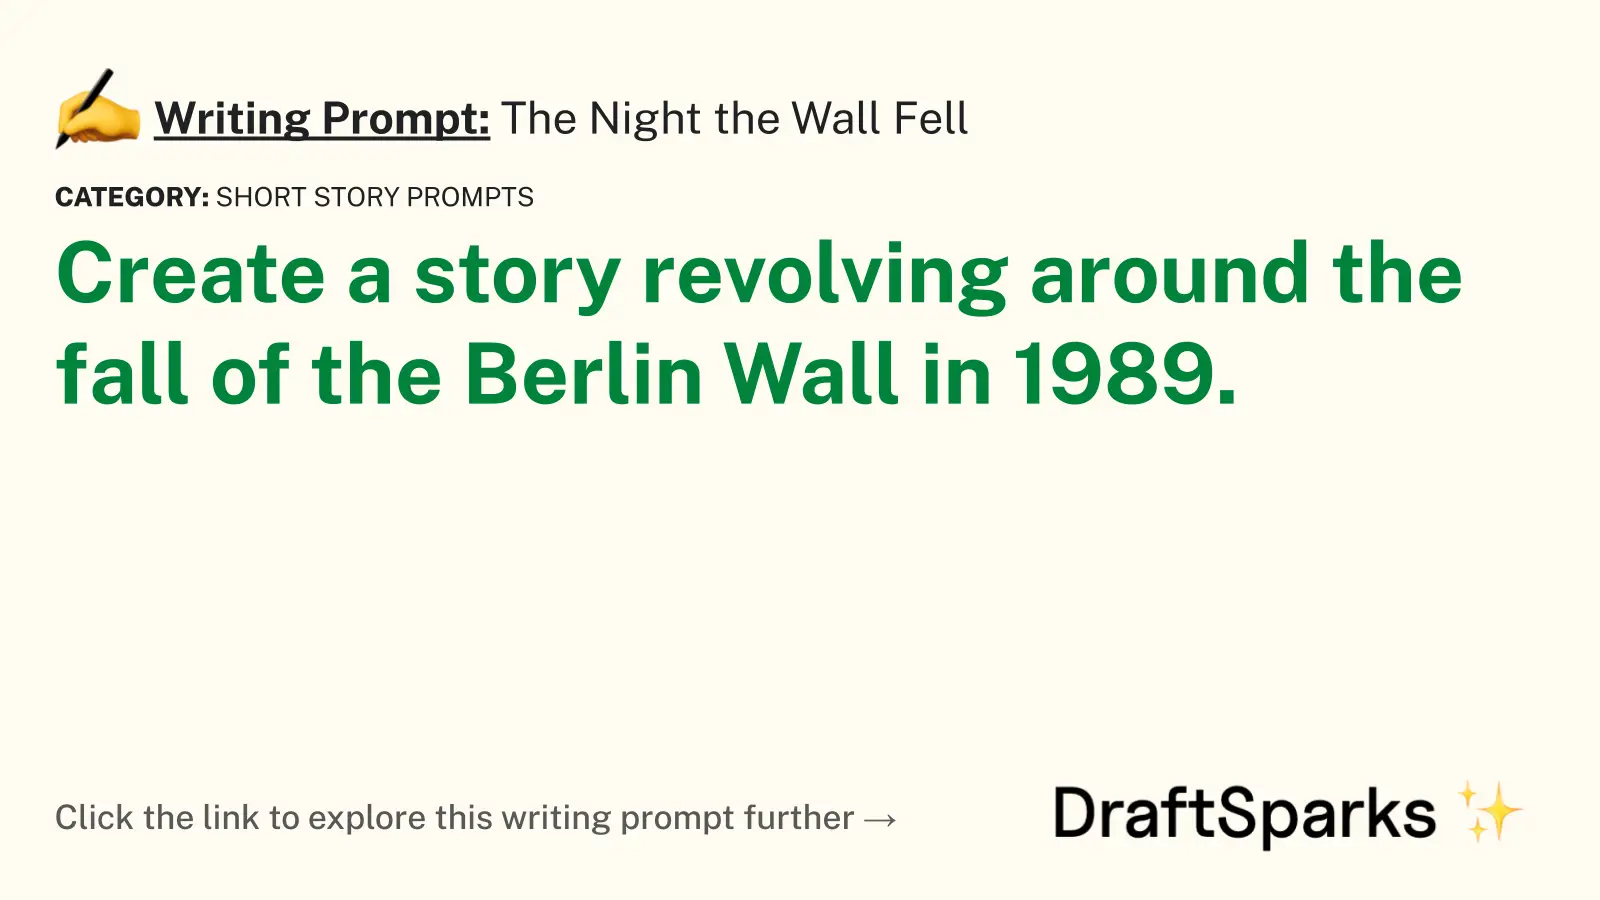 The Night the Wall Fell